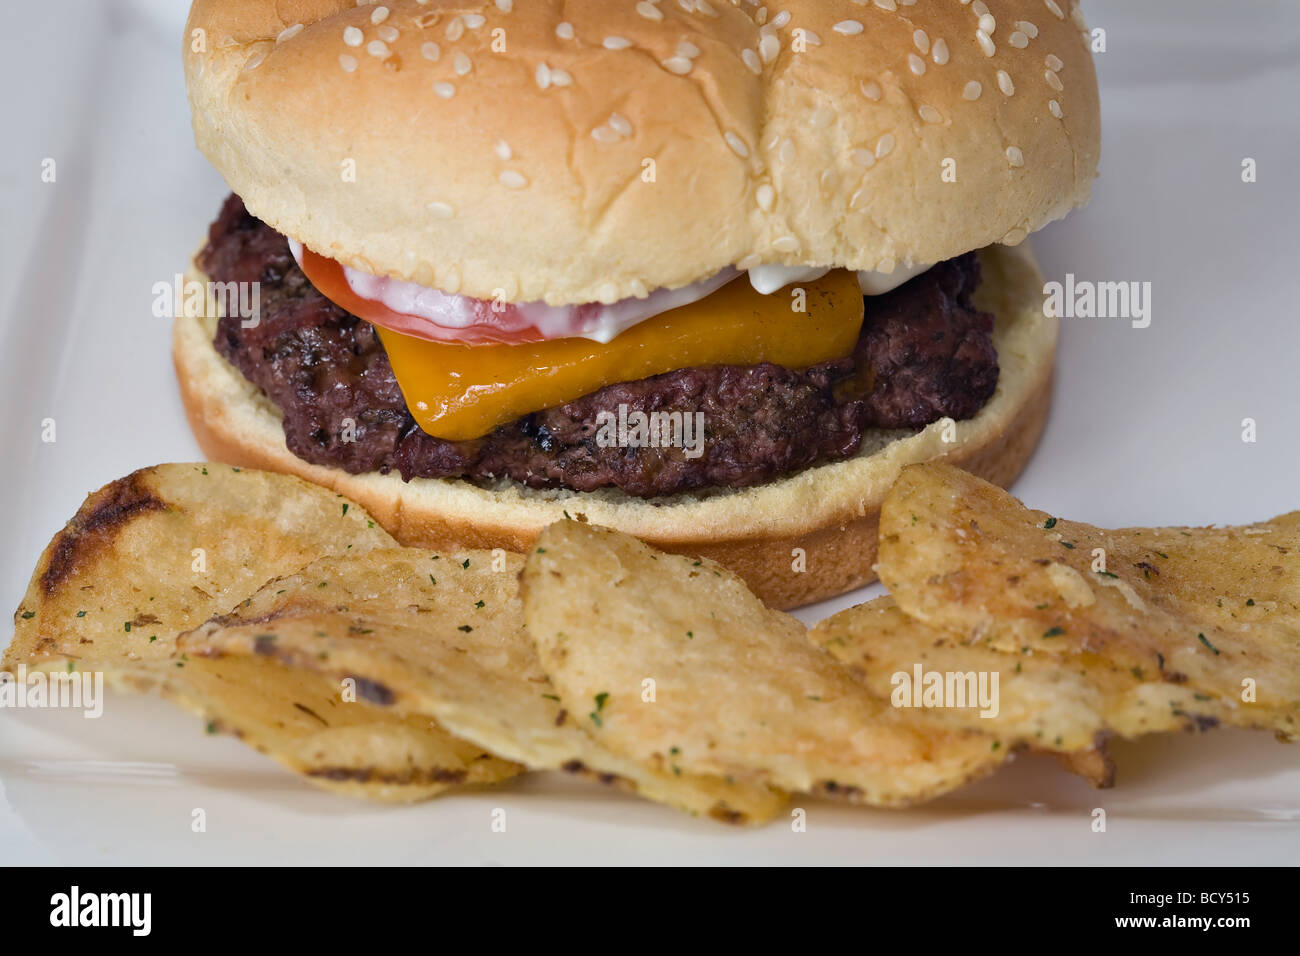 Close up of a hearty cheeseburger and potato chips on a white serving plate Stock Photo